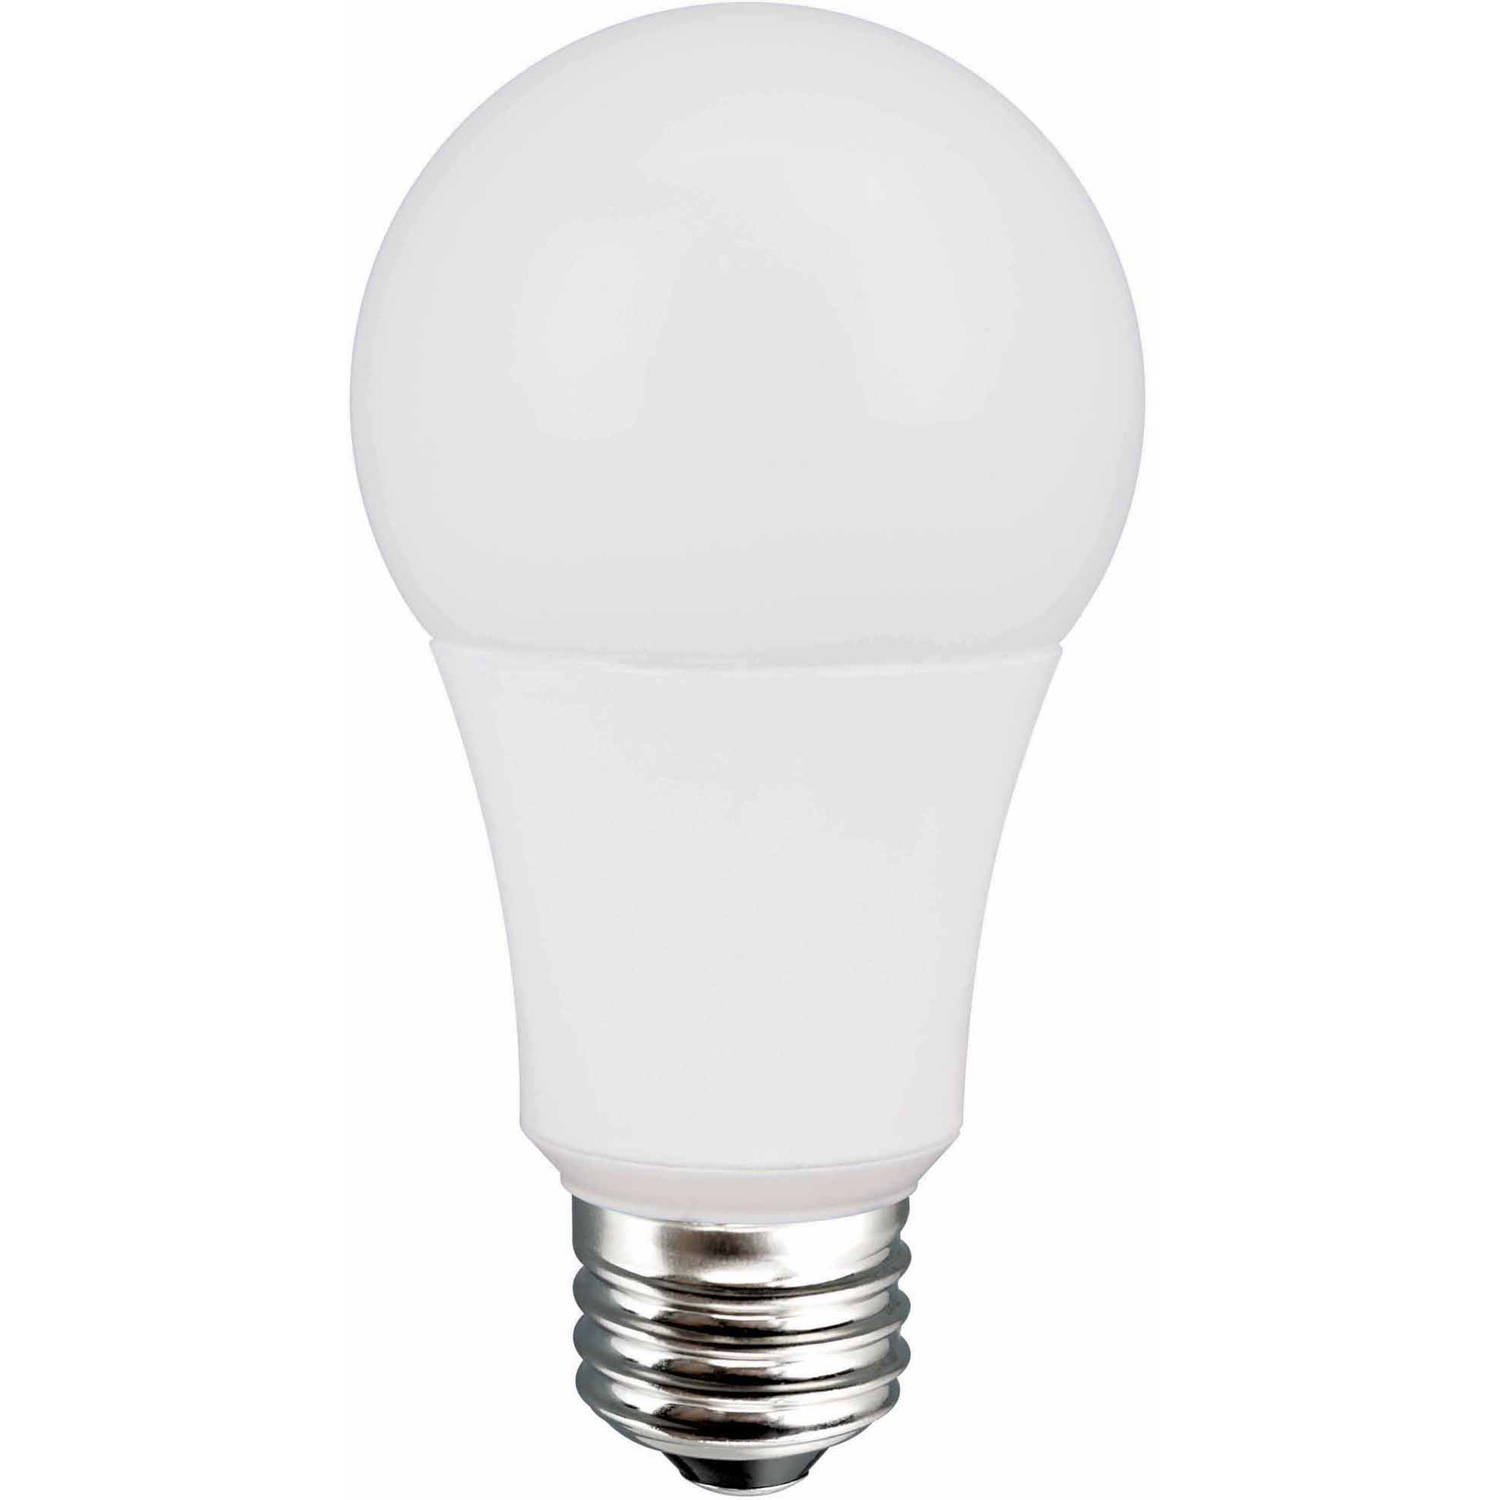 Great Value LED Light Bulb, 9W (60W Equivalent) A19 Lamp E26 Medium Base, Non-Dimmable, Soft White - image 3 of 5